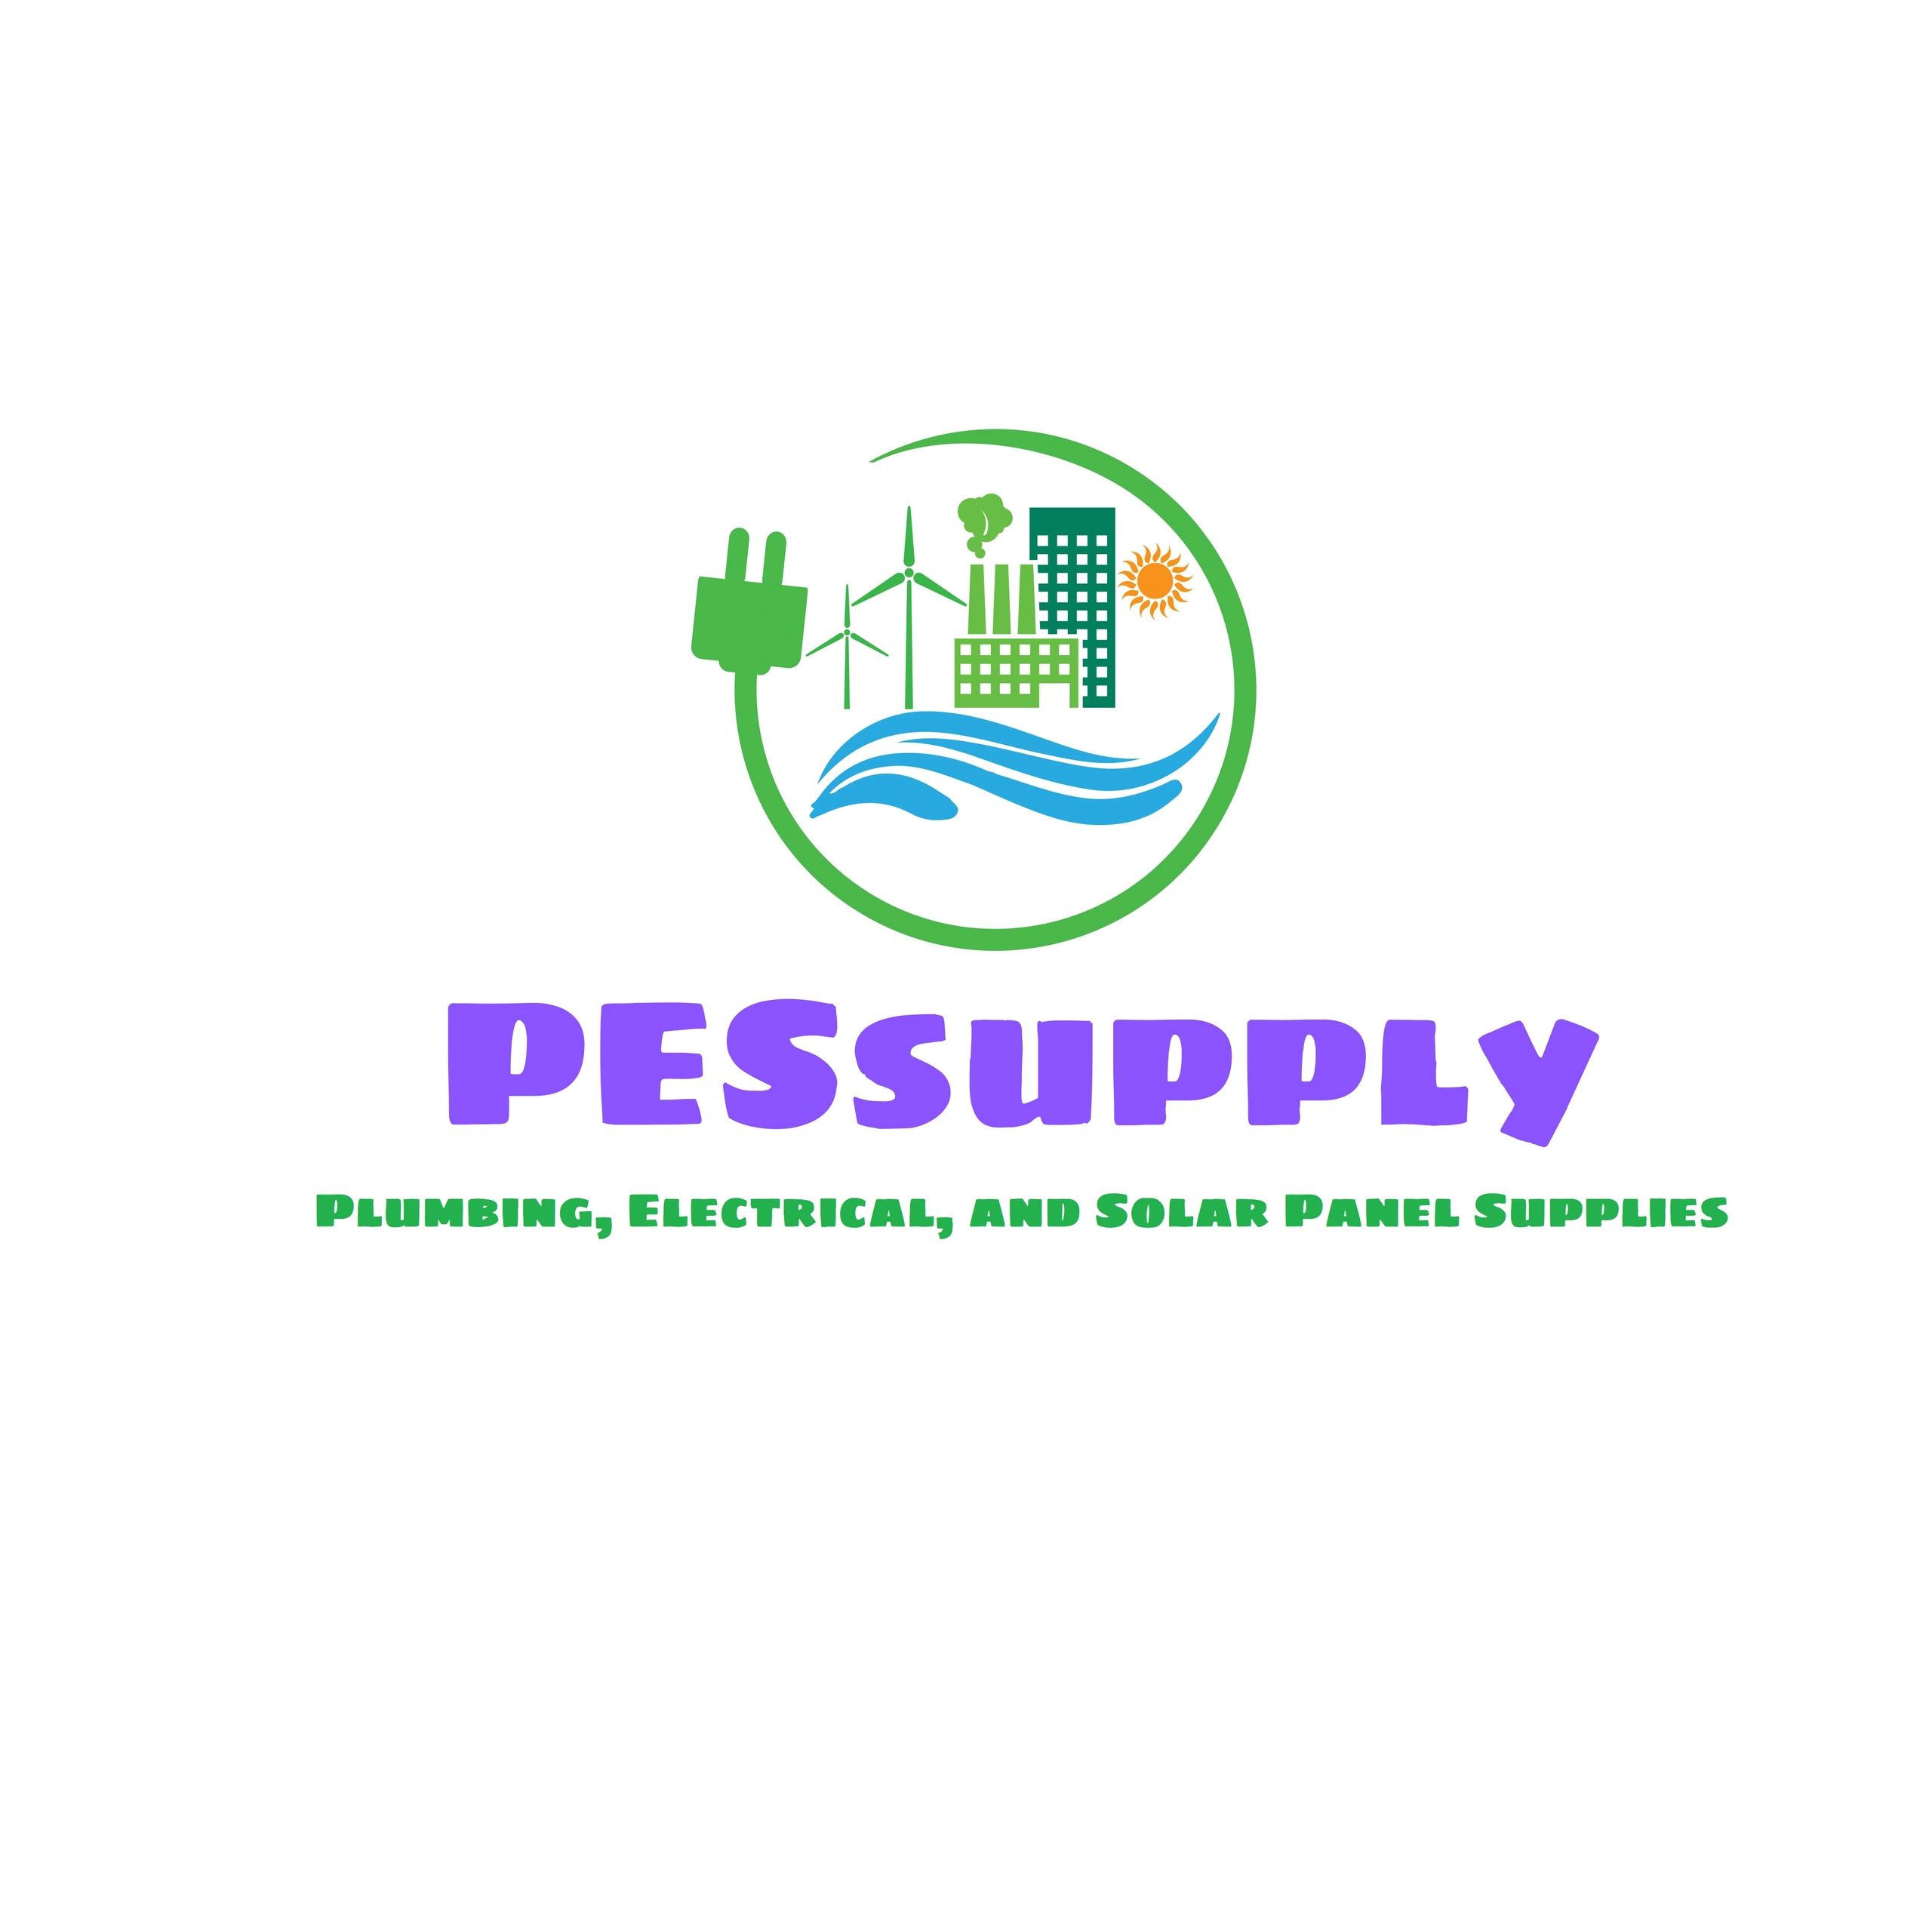 Plumbing, Electrical, and Solar Panel Supplies